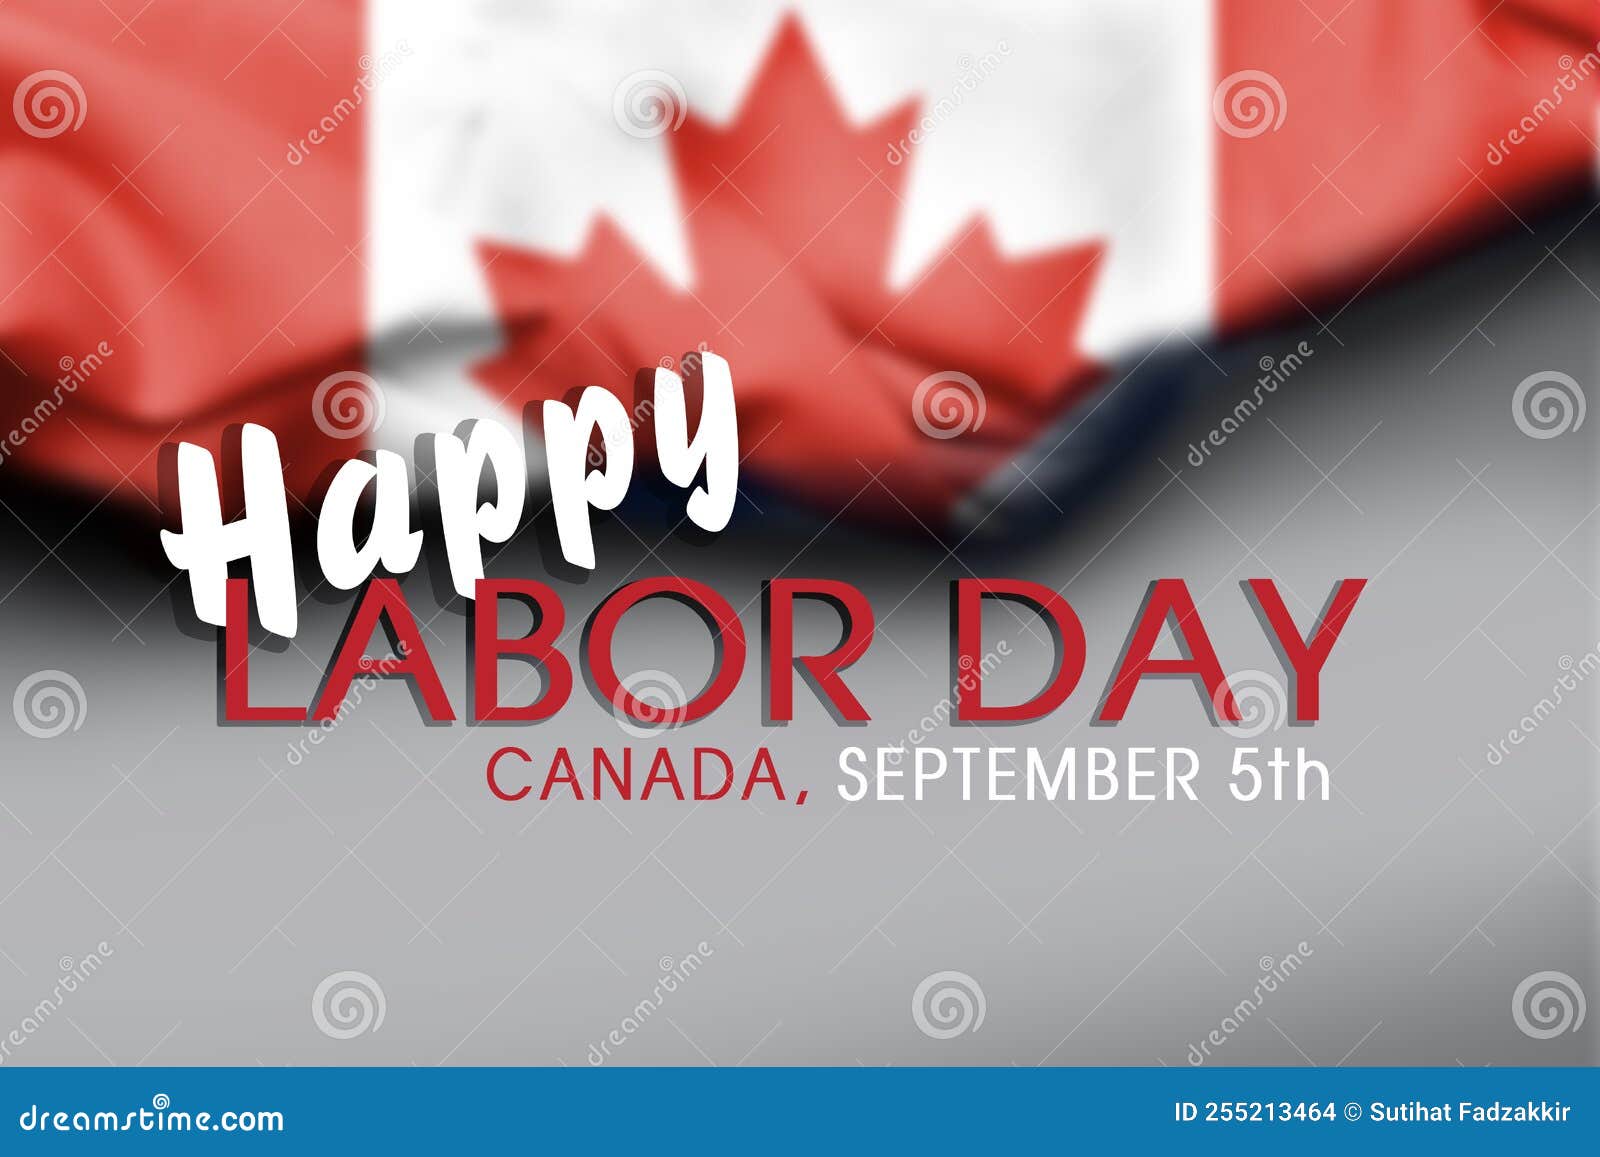 Canada Labor Day Banner Template Illustration. Canadian Labor Day